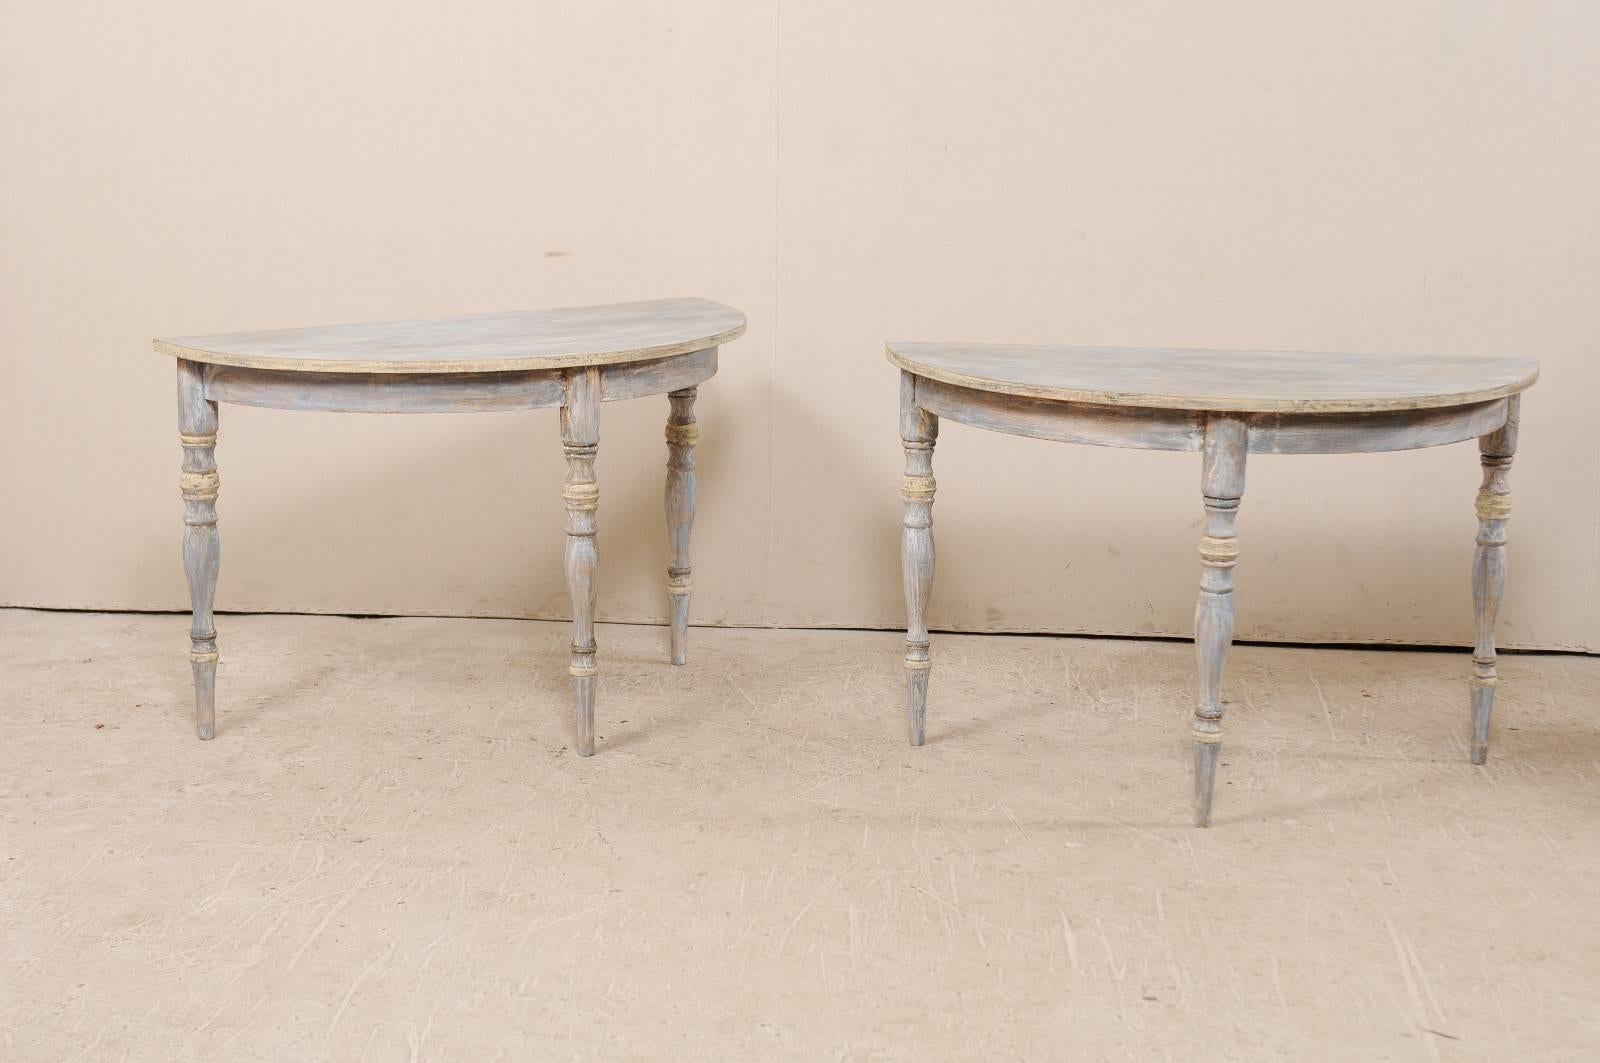 A pair of 19th century Swedish demilune tables. This pair of painted wood demilune tables features half moon tops over round aprons. These demilune console tables are raised on three turned and slightly tapered legs. They are primarily blue in color